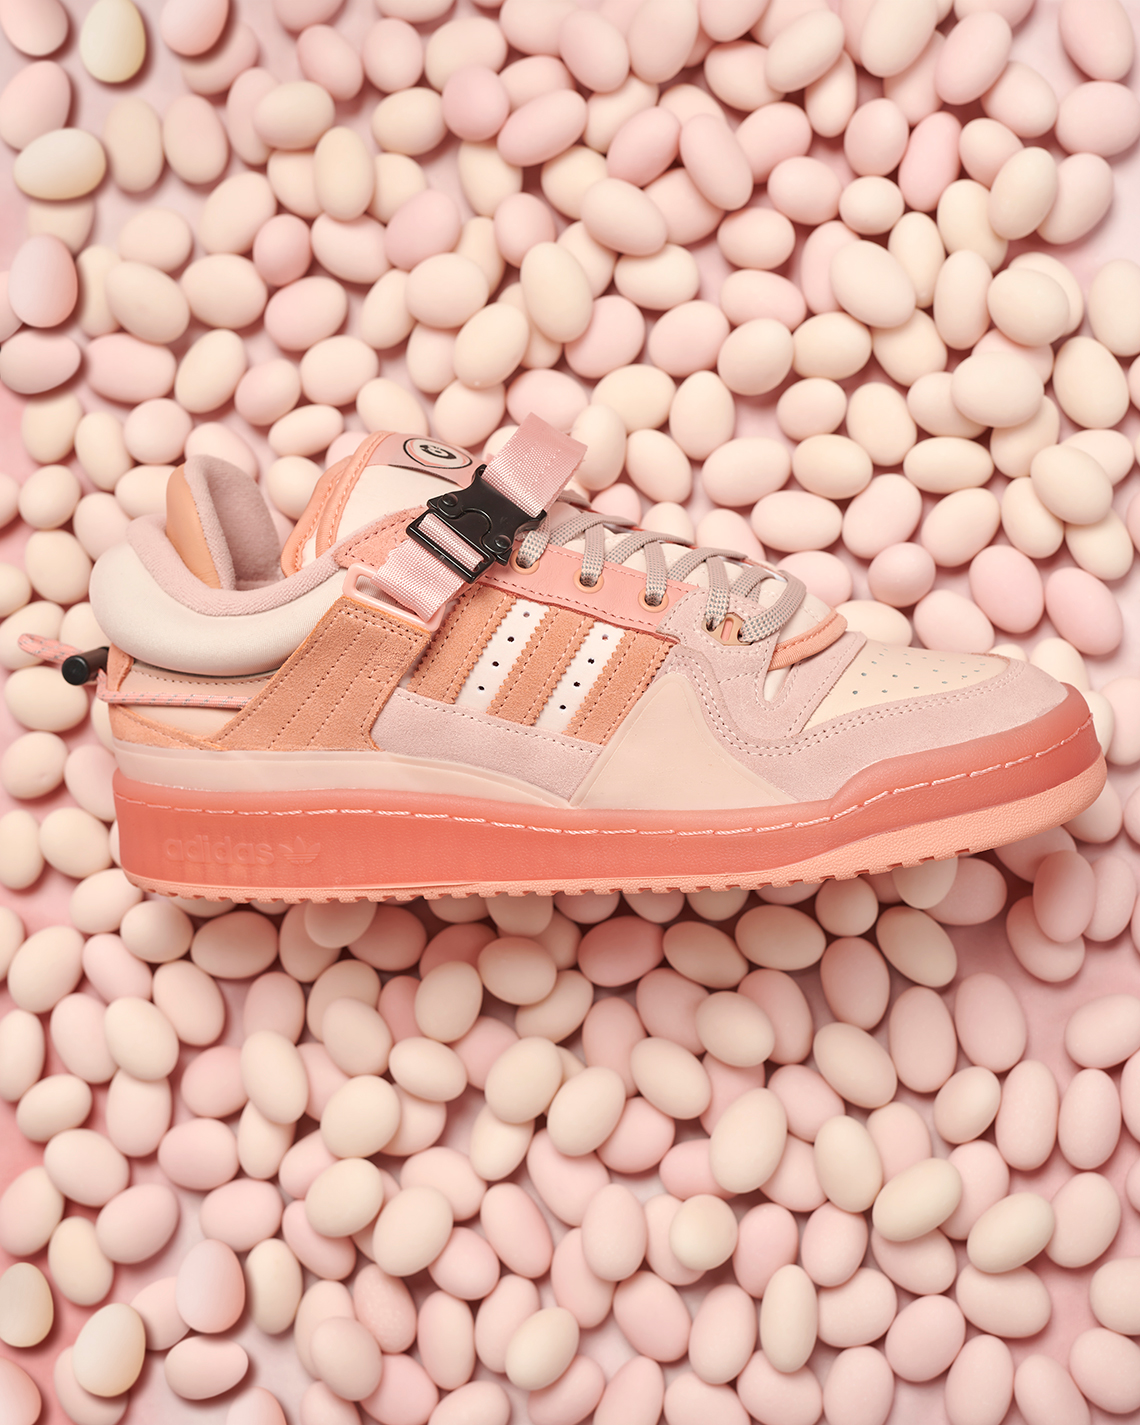 bad-bunny-adidas-pink-shoes-release-date-3.jpg